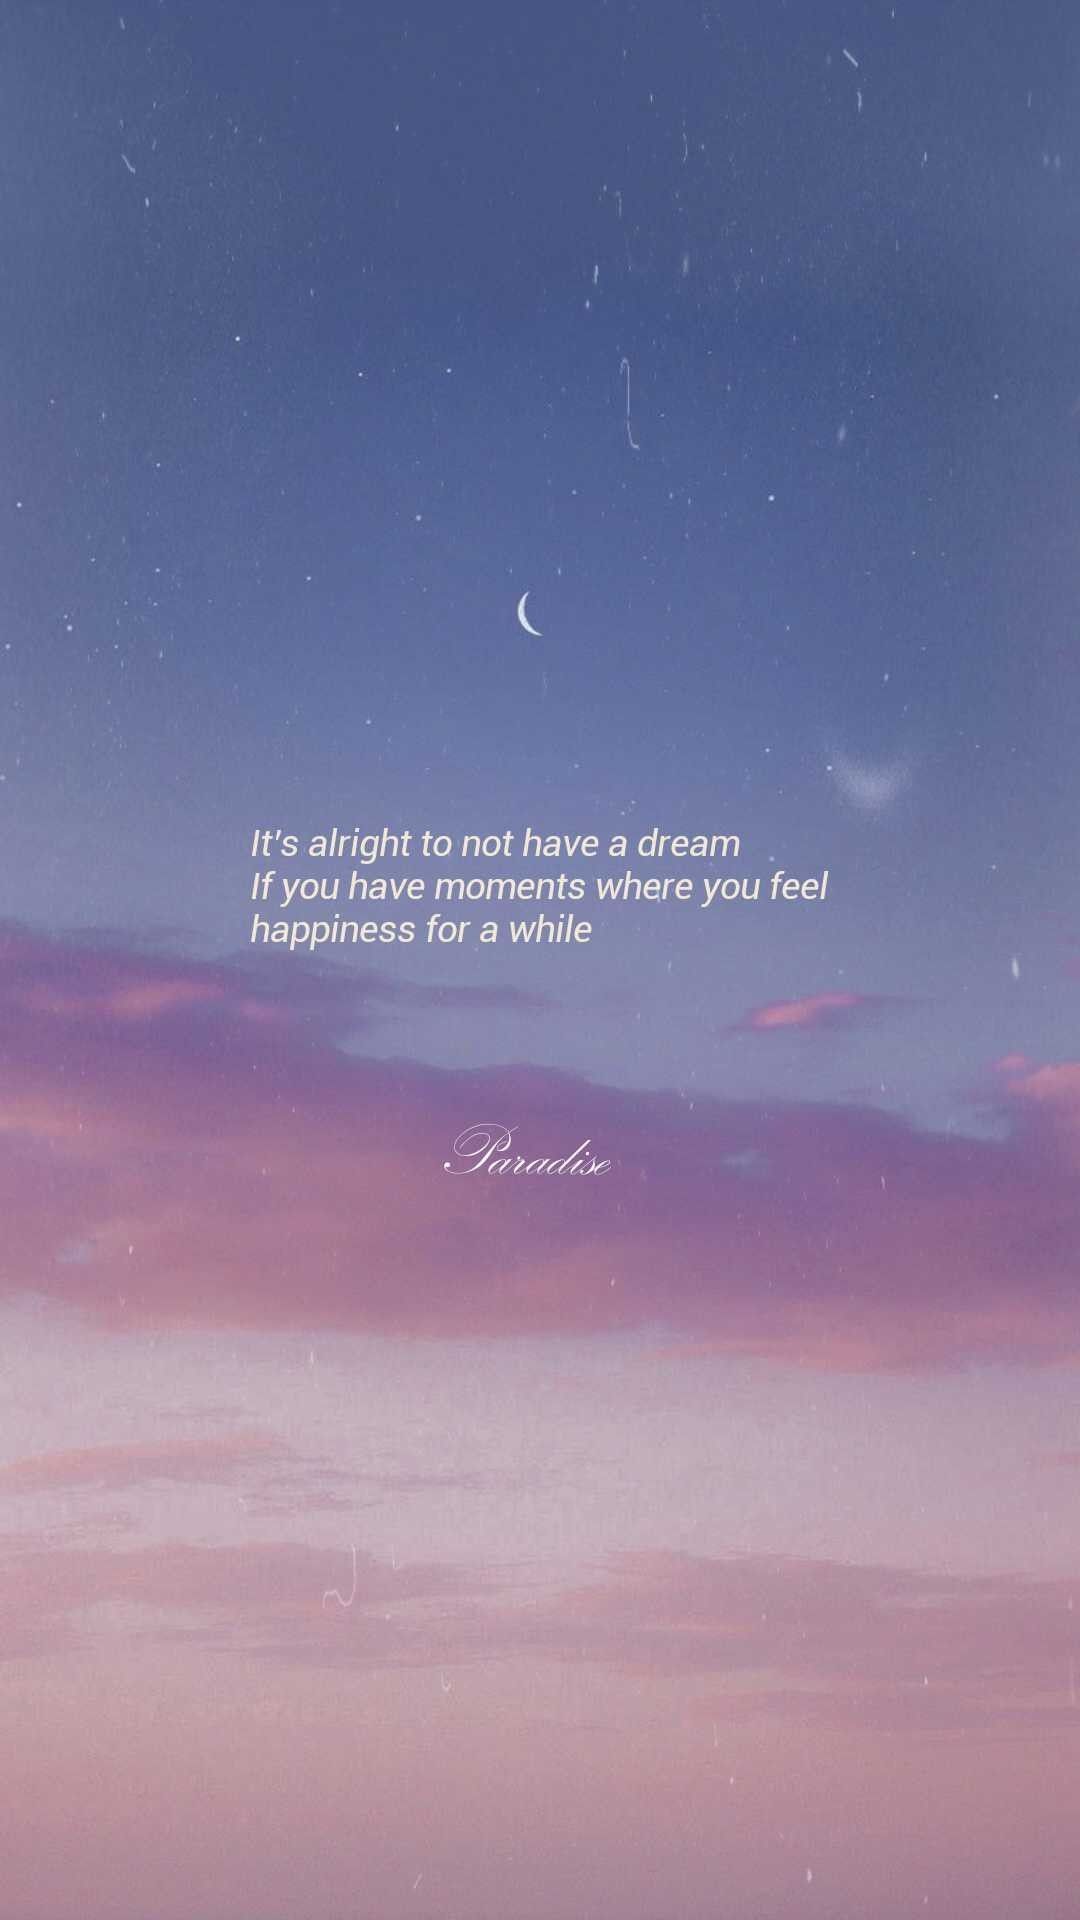 BTS Lyrics Quotes APK for Android, HD phone wallpaper | Peakpx